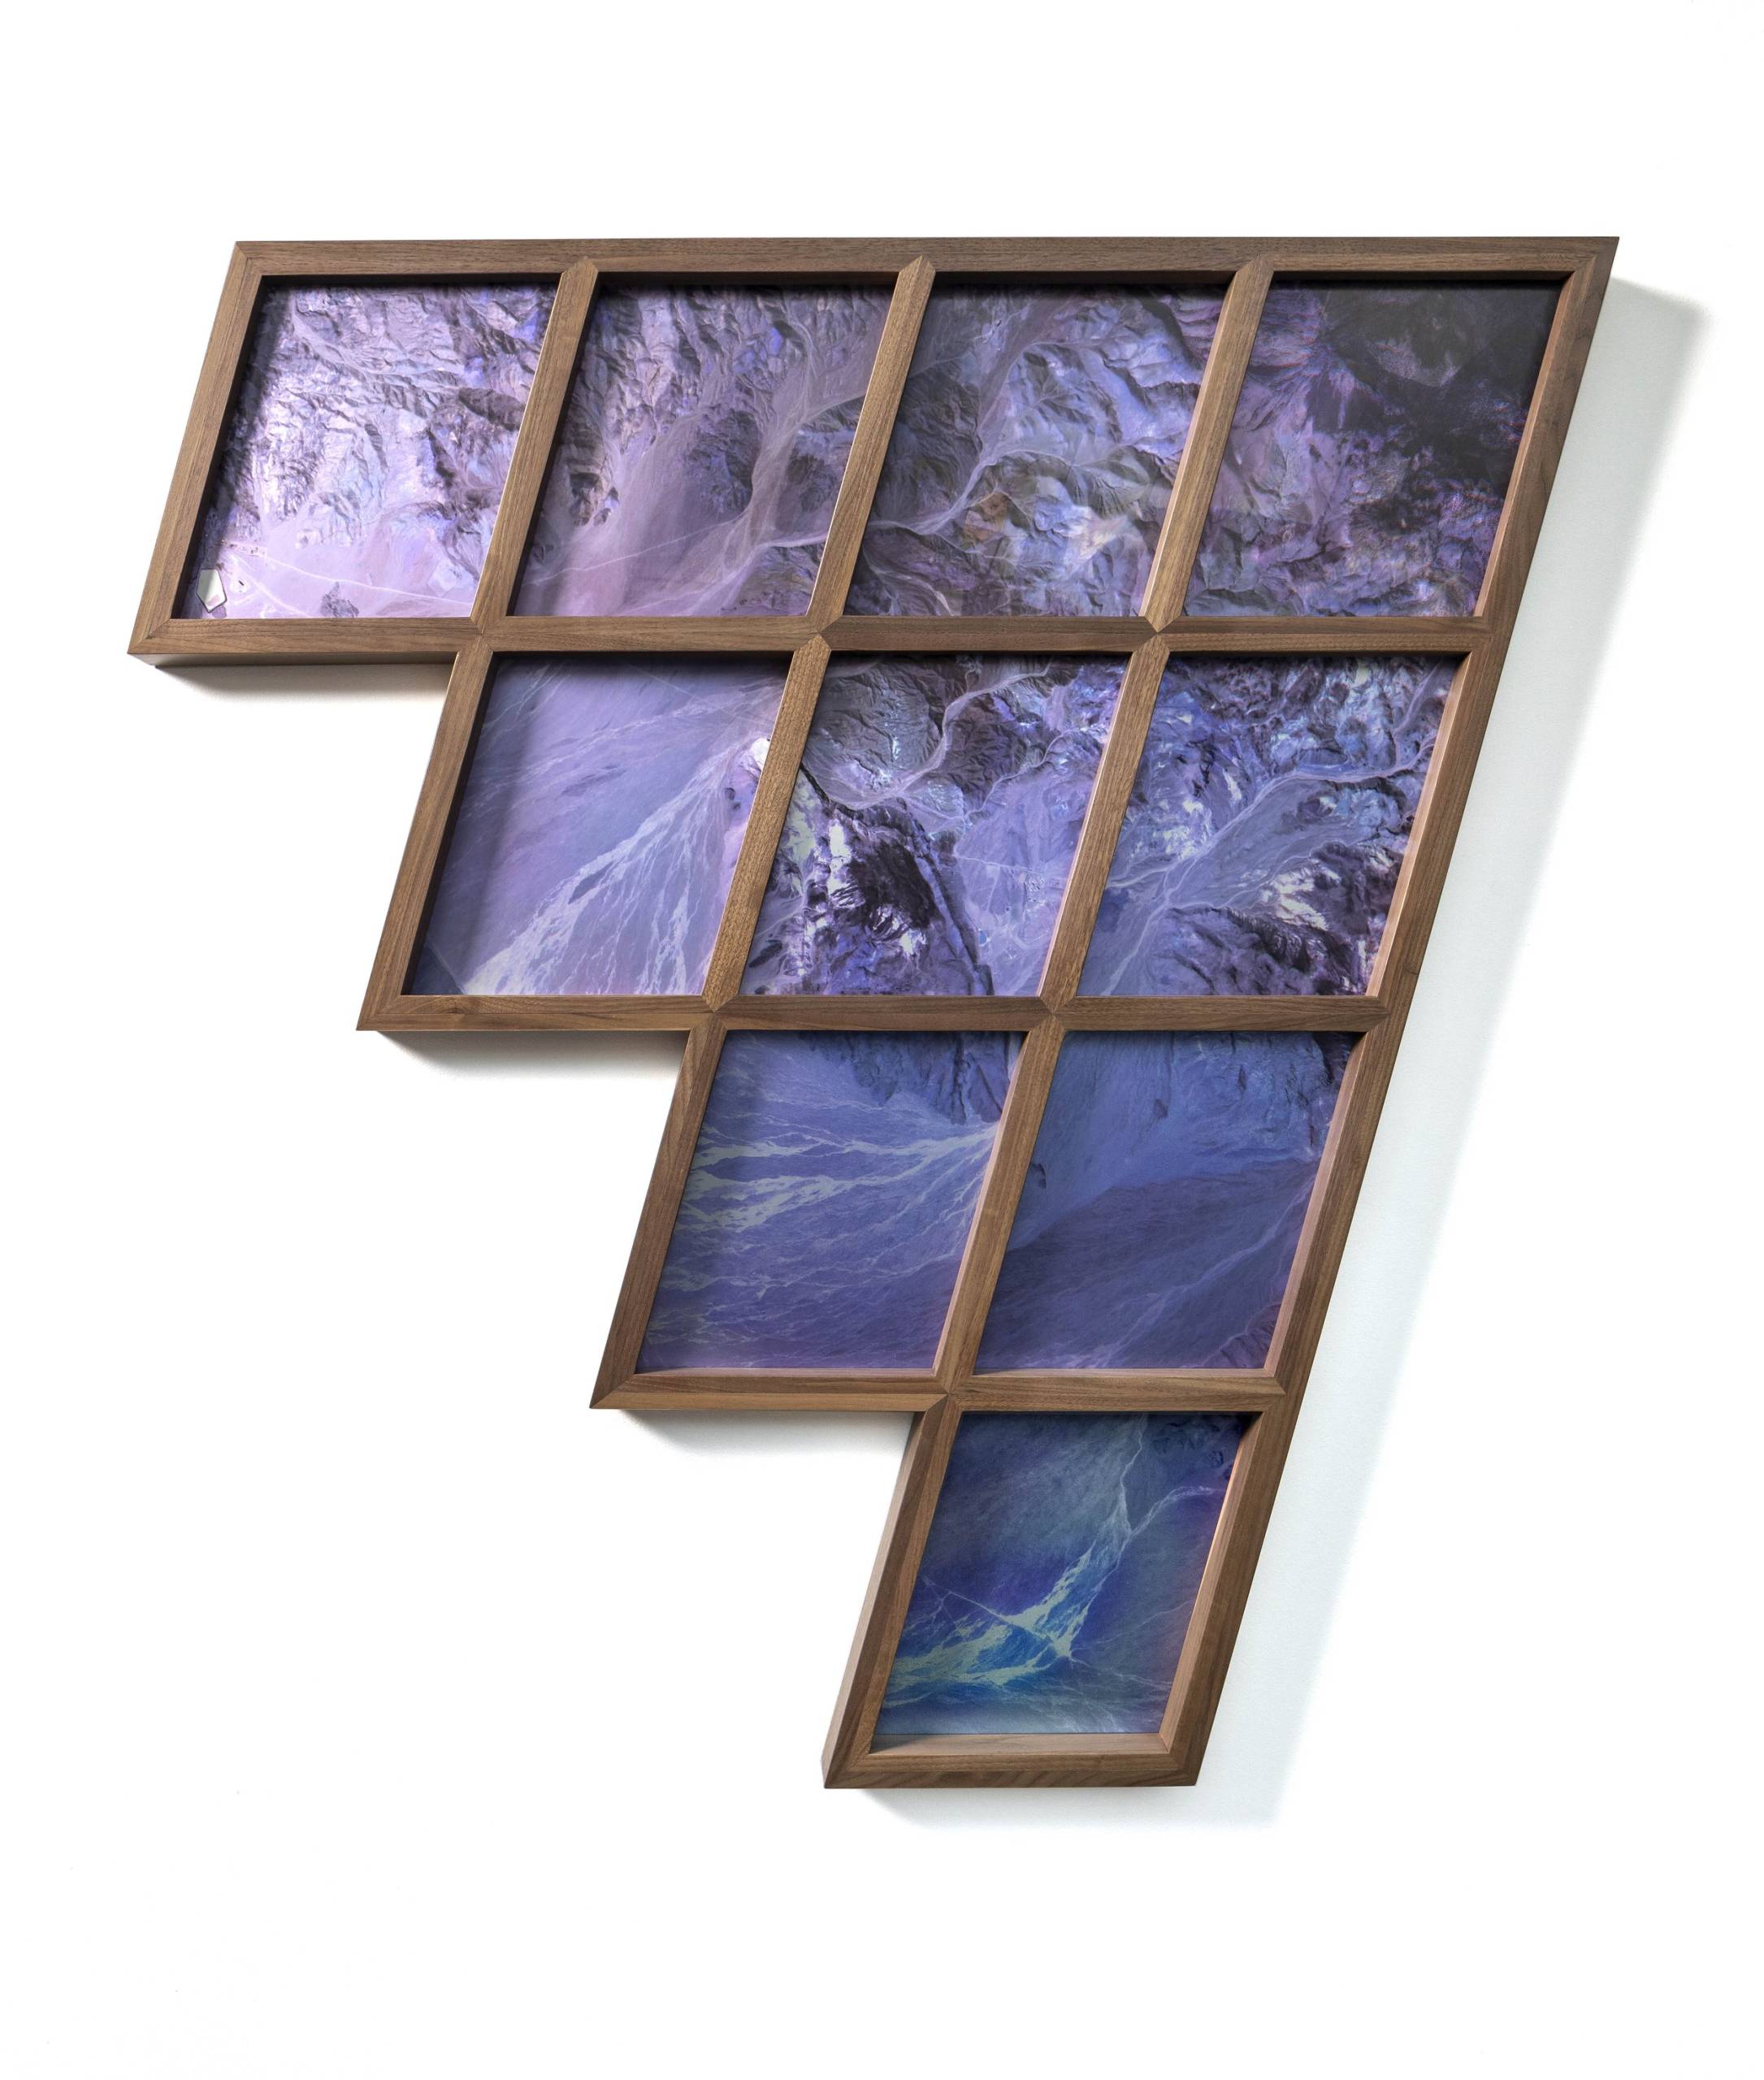 Framed photographic piece with rhombus-shaped prints laid out in stair step-like grid, showing purple aerial landscapes